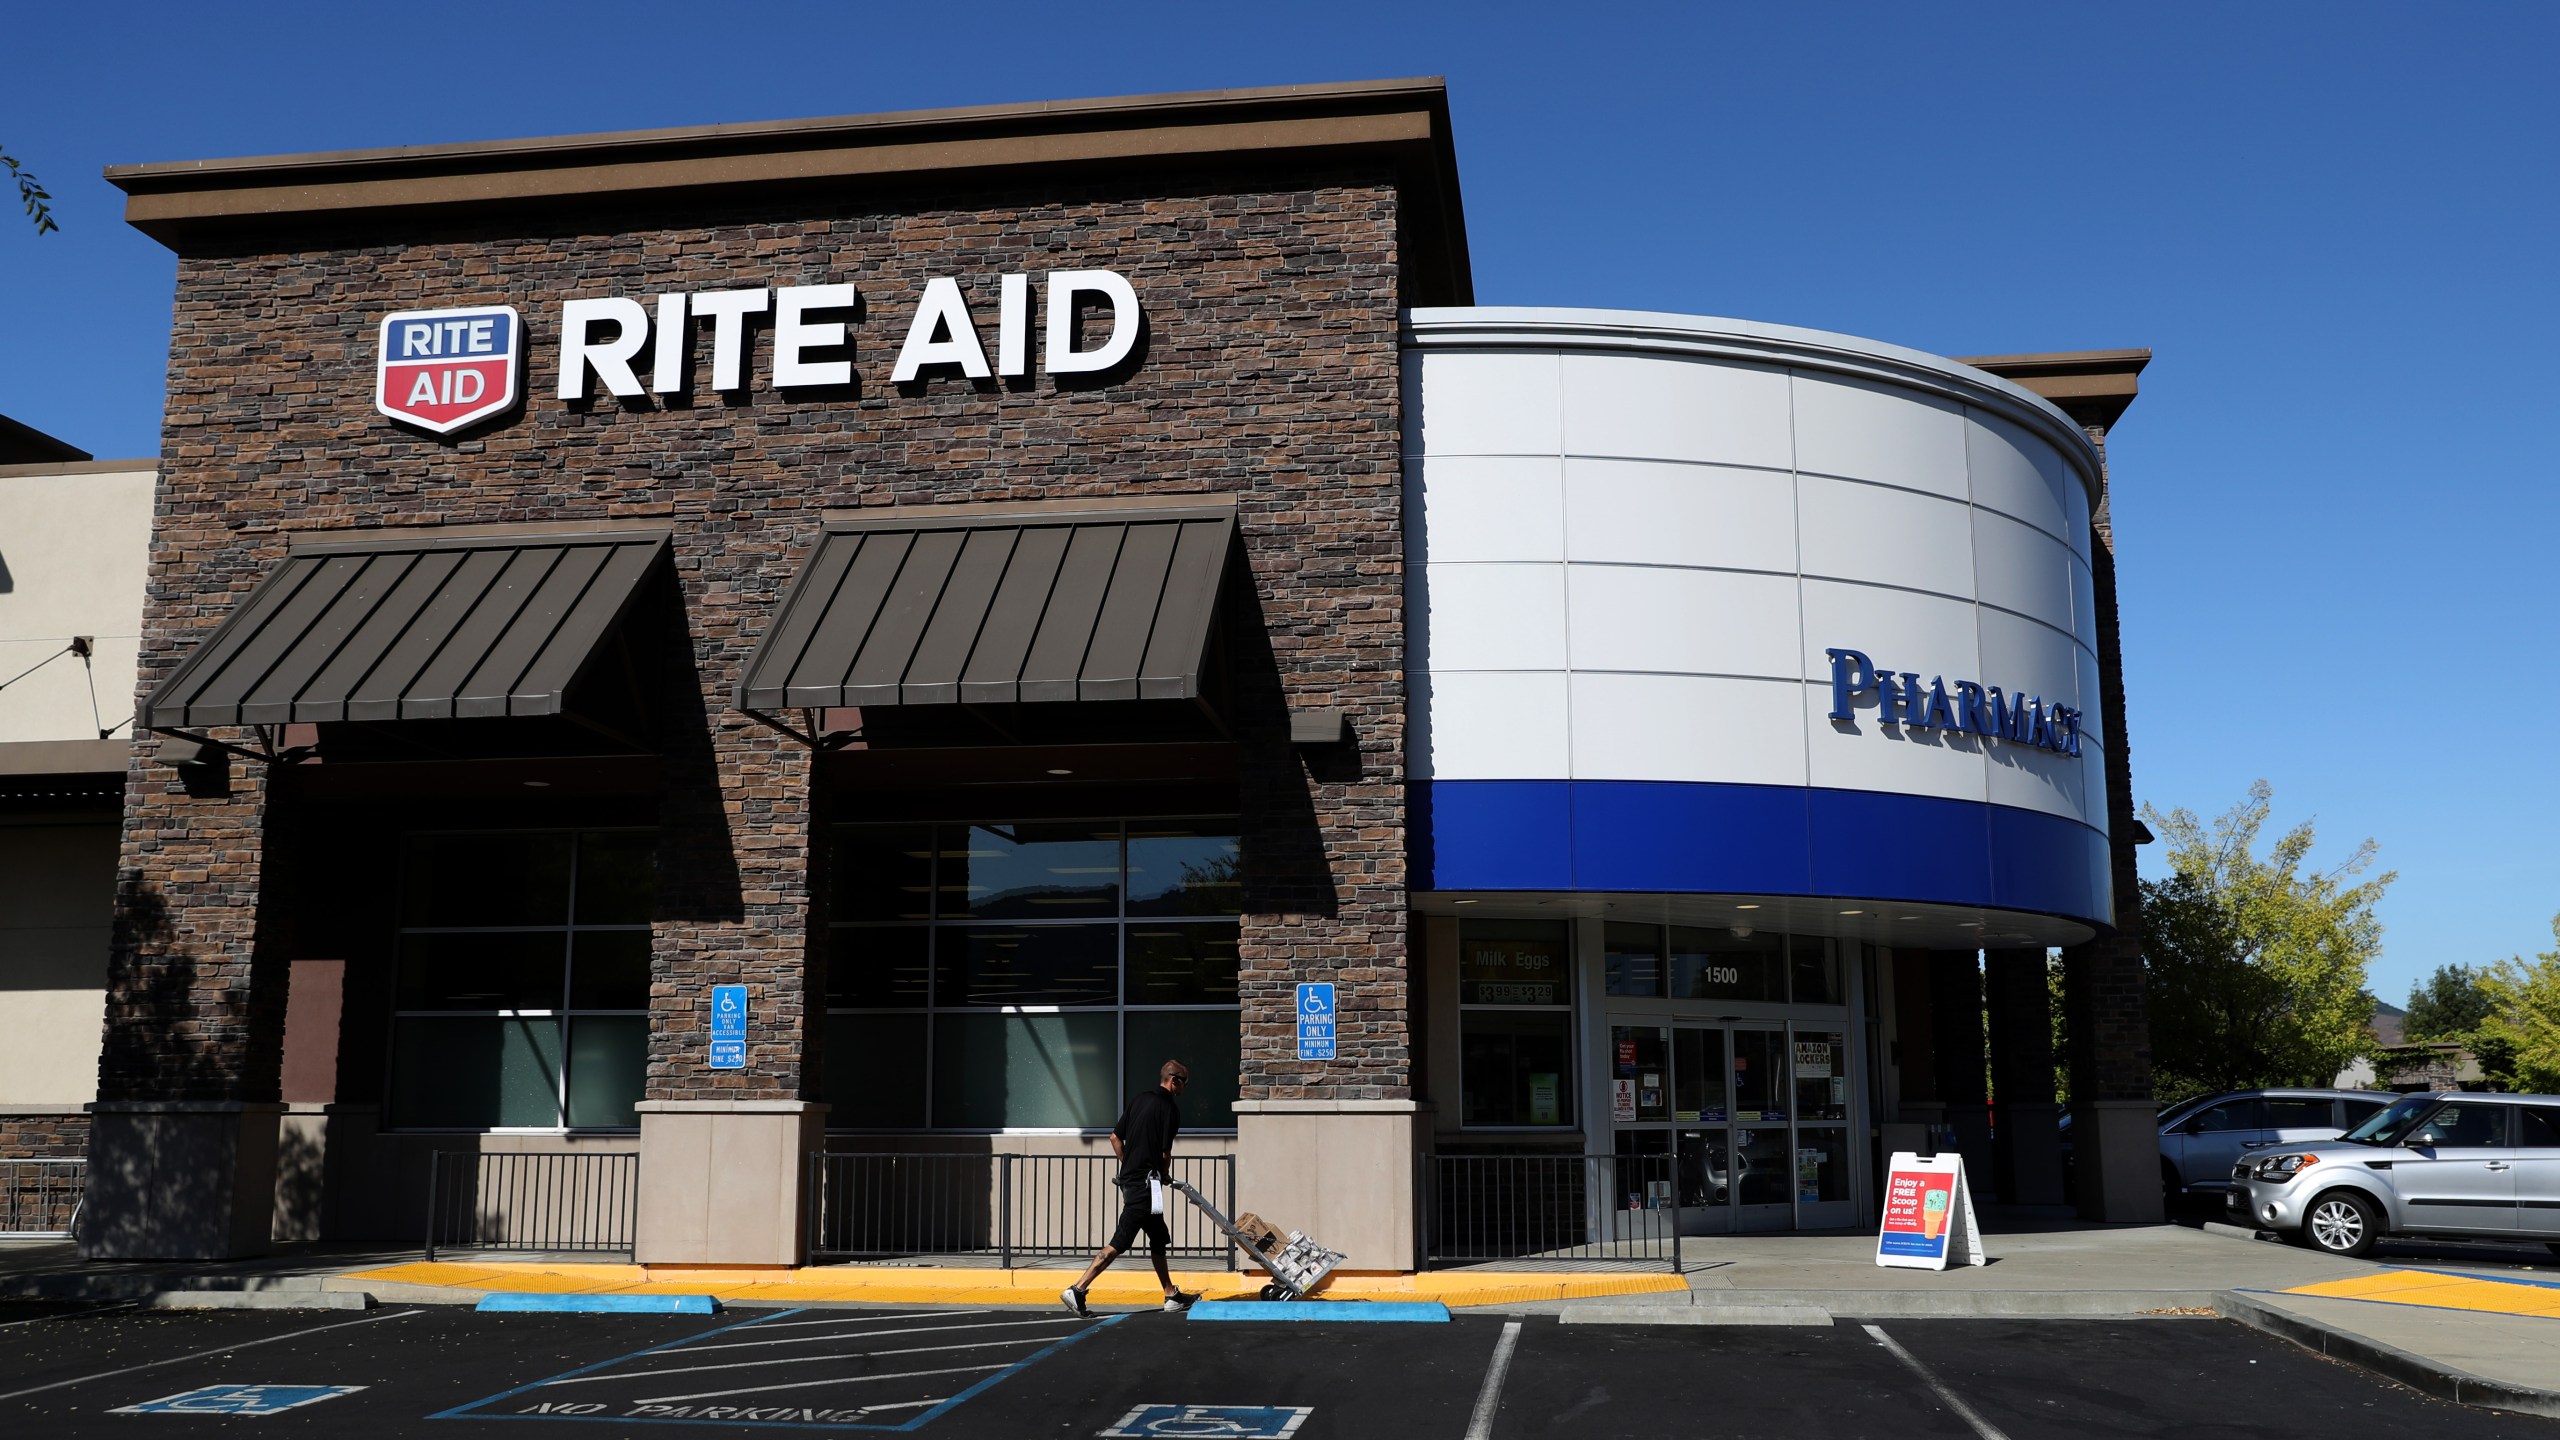 The Rite Aid logo is displayed on the exterior of a Rite Aid pharmacy on September 26, 2019 in California. (Credit: Justin Sullivan/Getty Images)